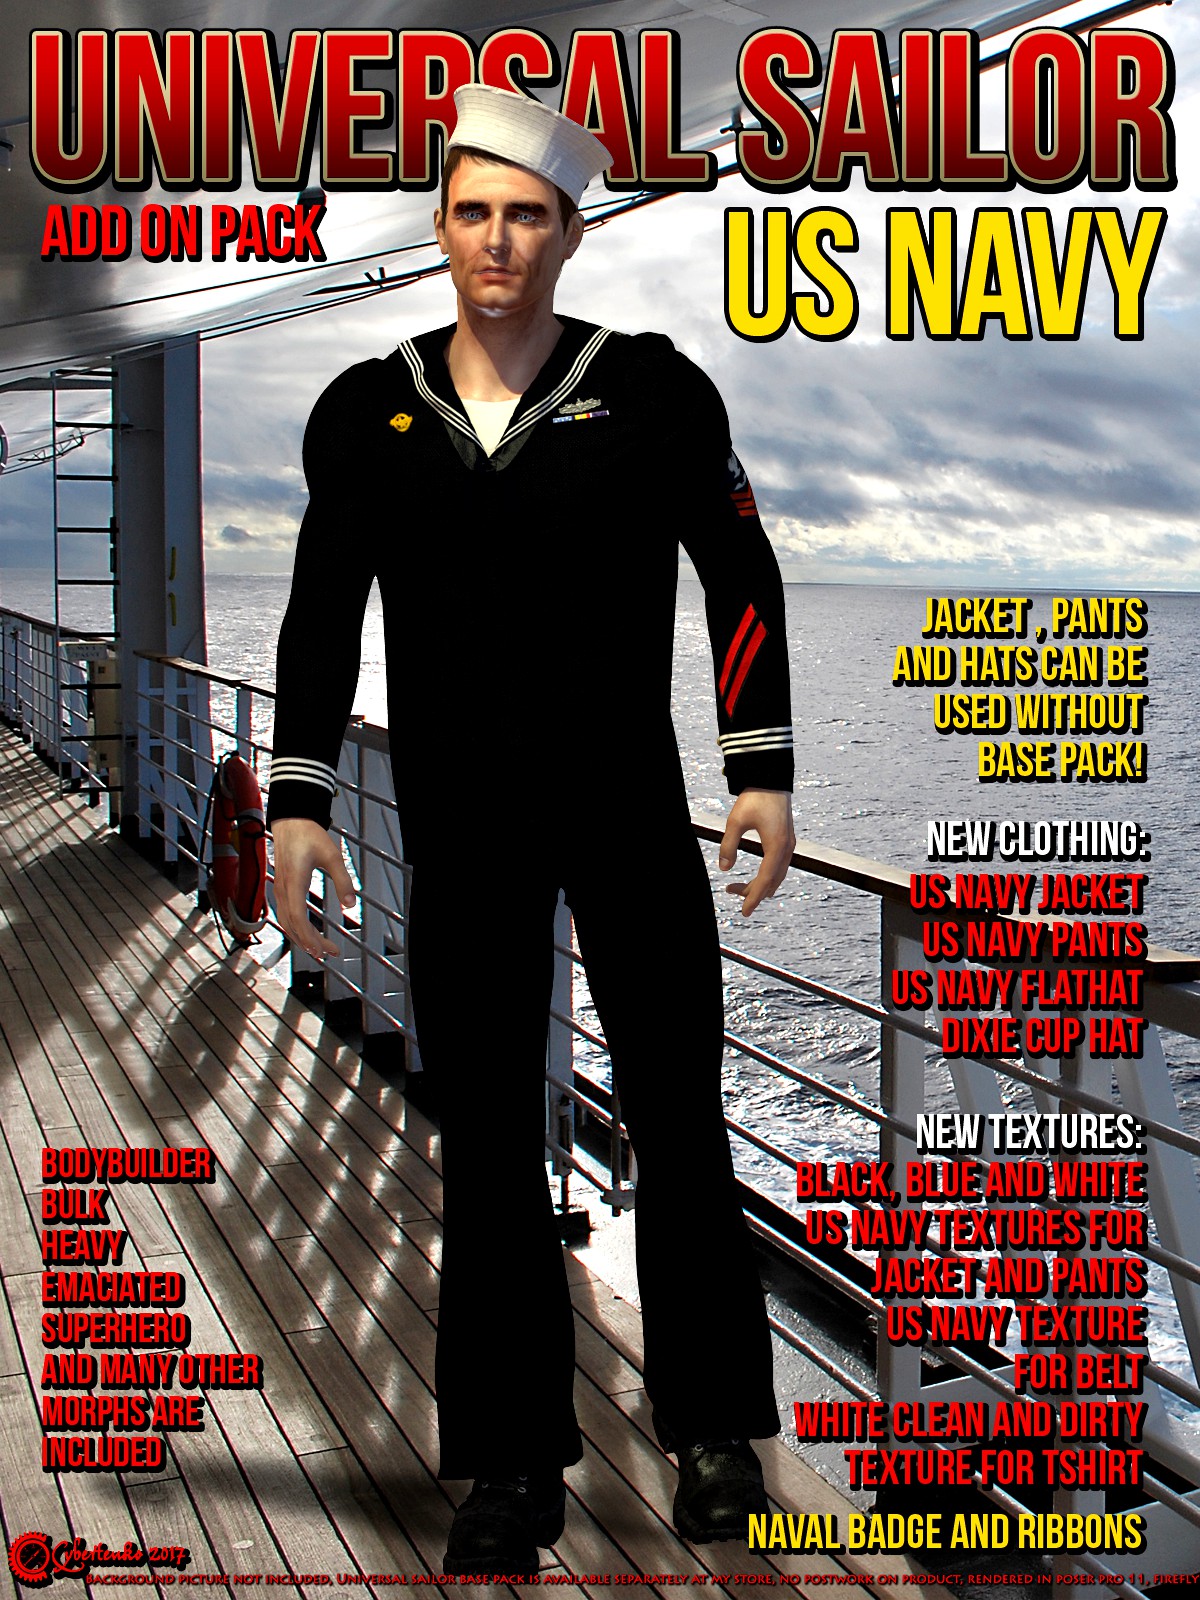 US Navy for Universal Sailor